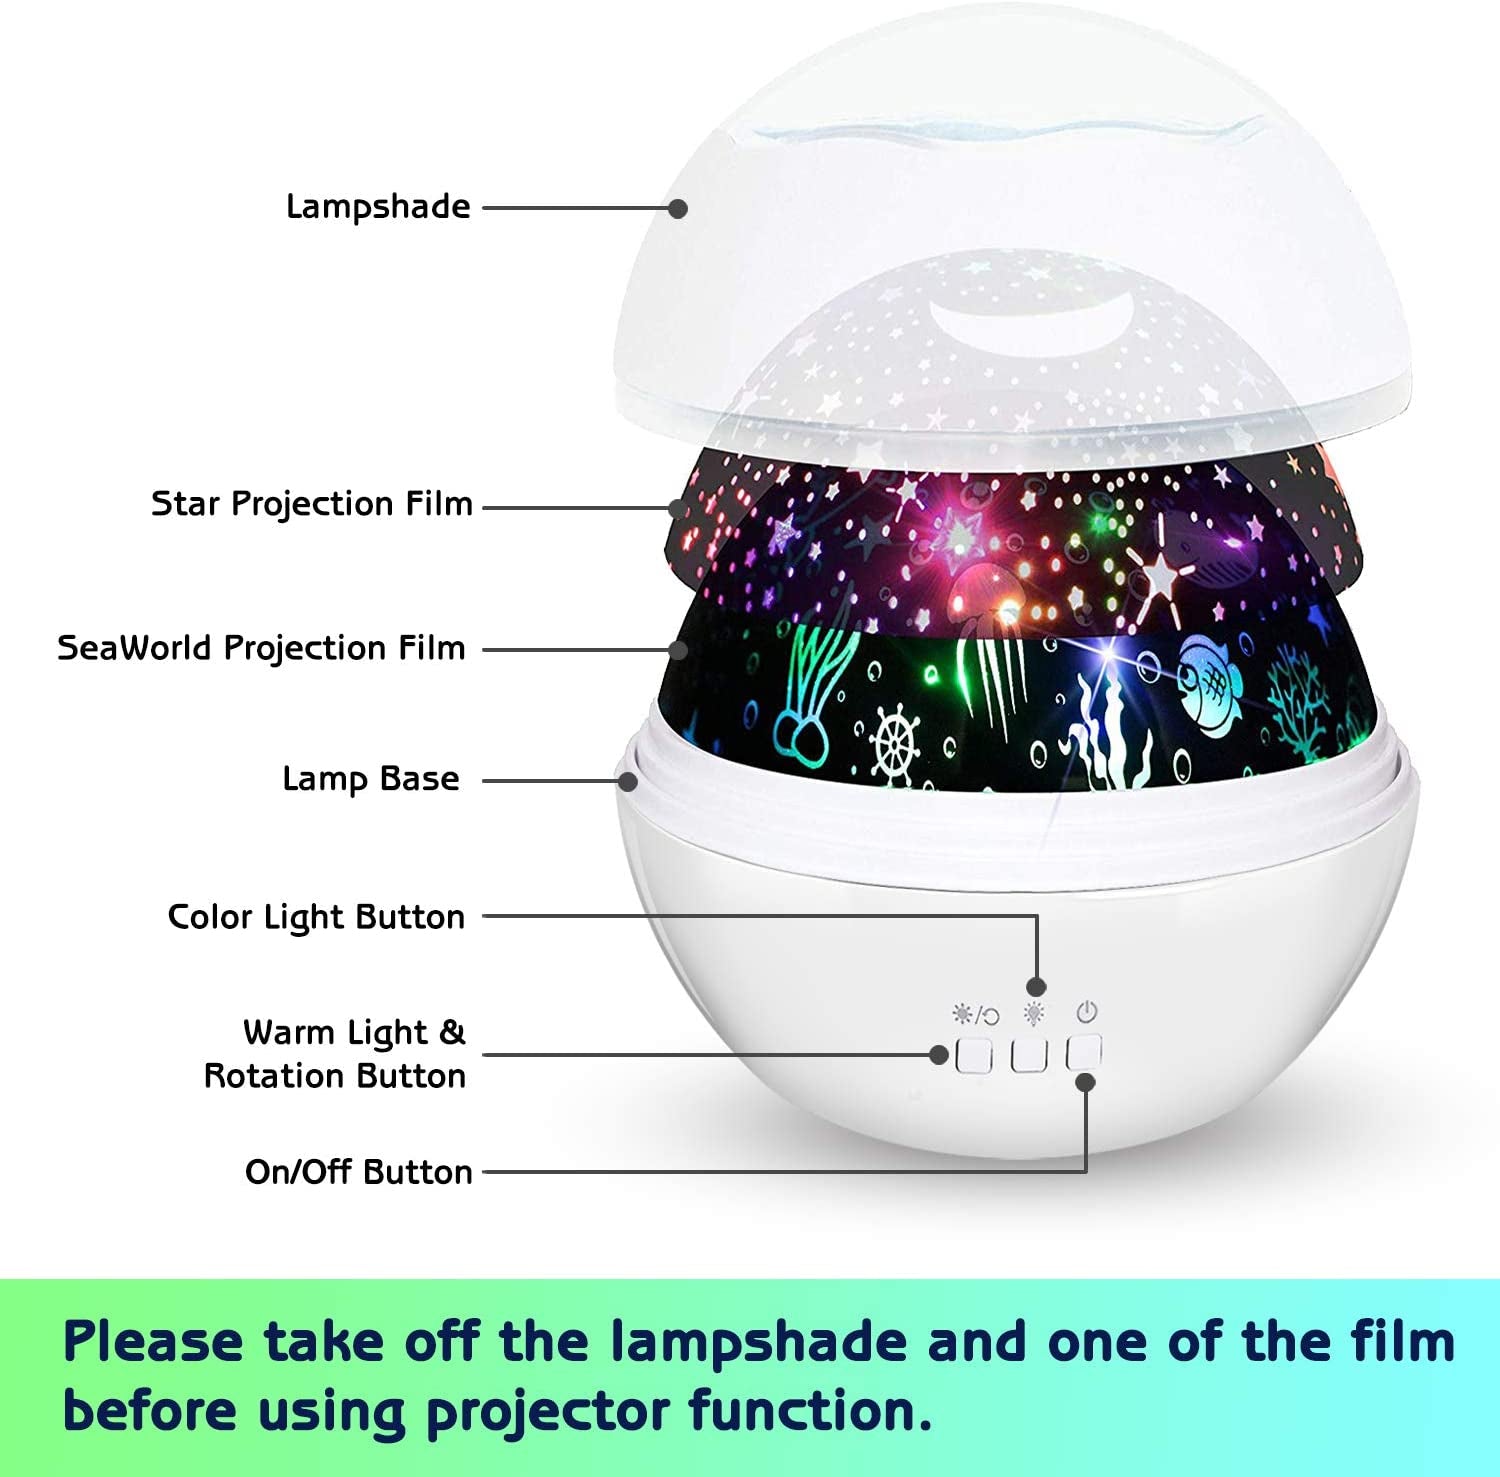 Moredig Baby Lights Projector, Star Projector Light with Starry Sky and Undersea Theme for Birthday, Parties - White